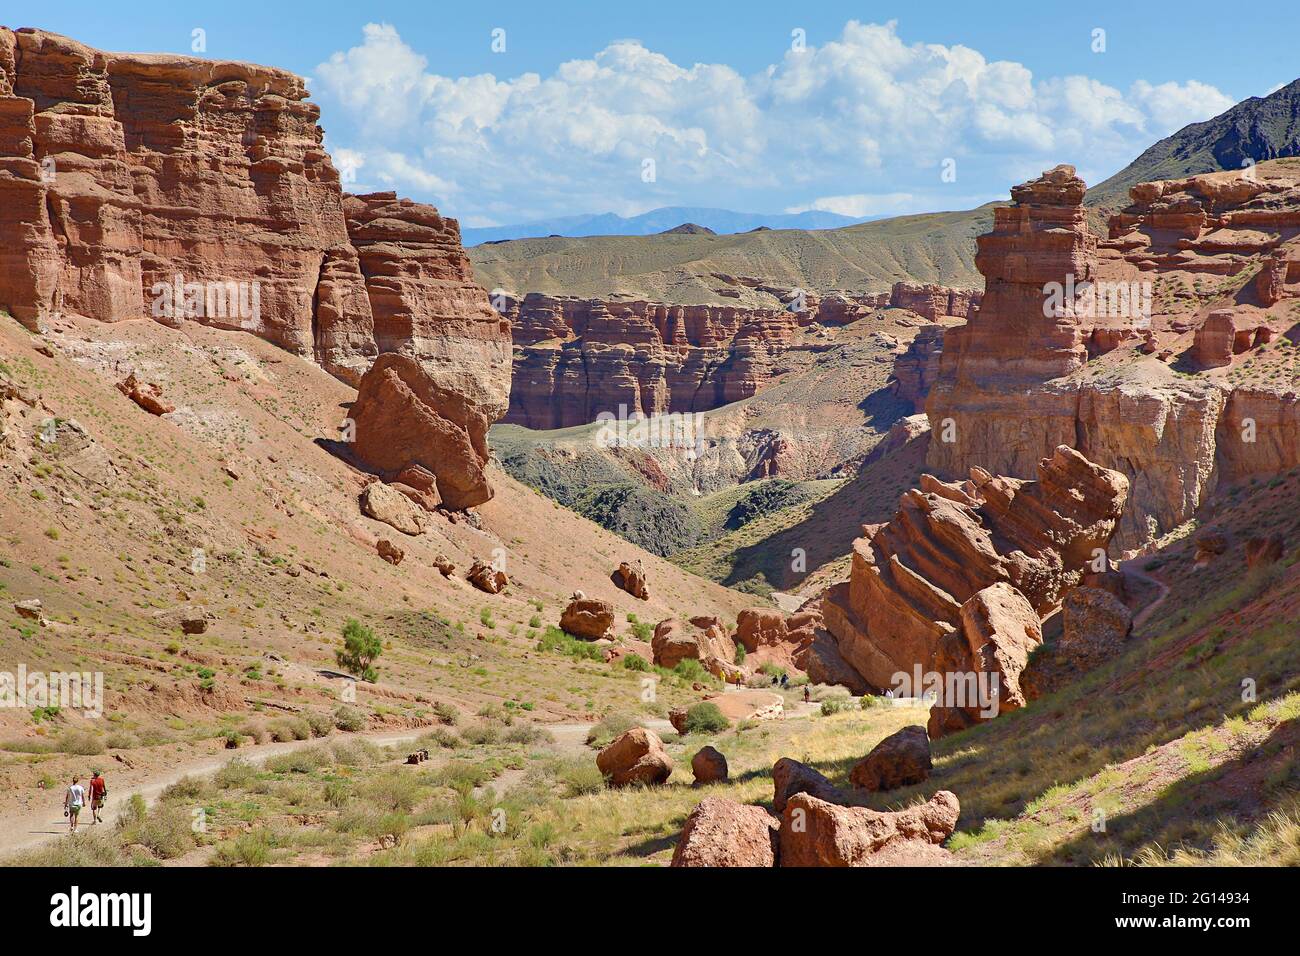 Geological rock formations in Charyn Canyon, Kazakhstan Stock Photo